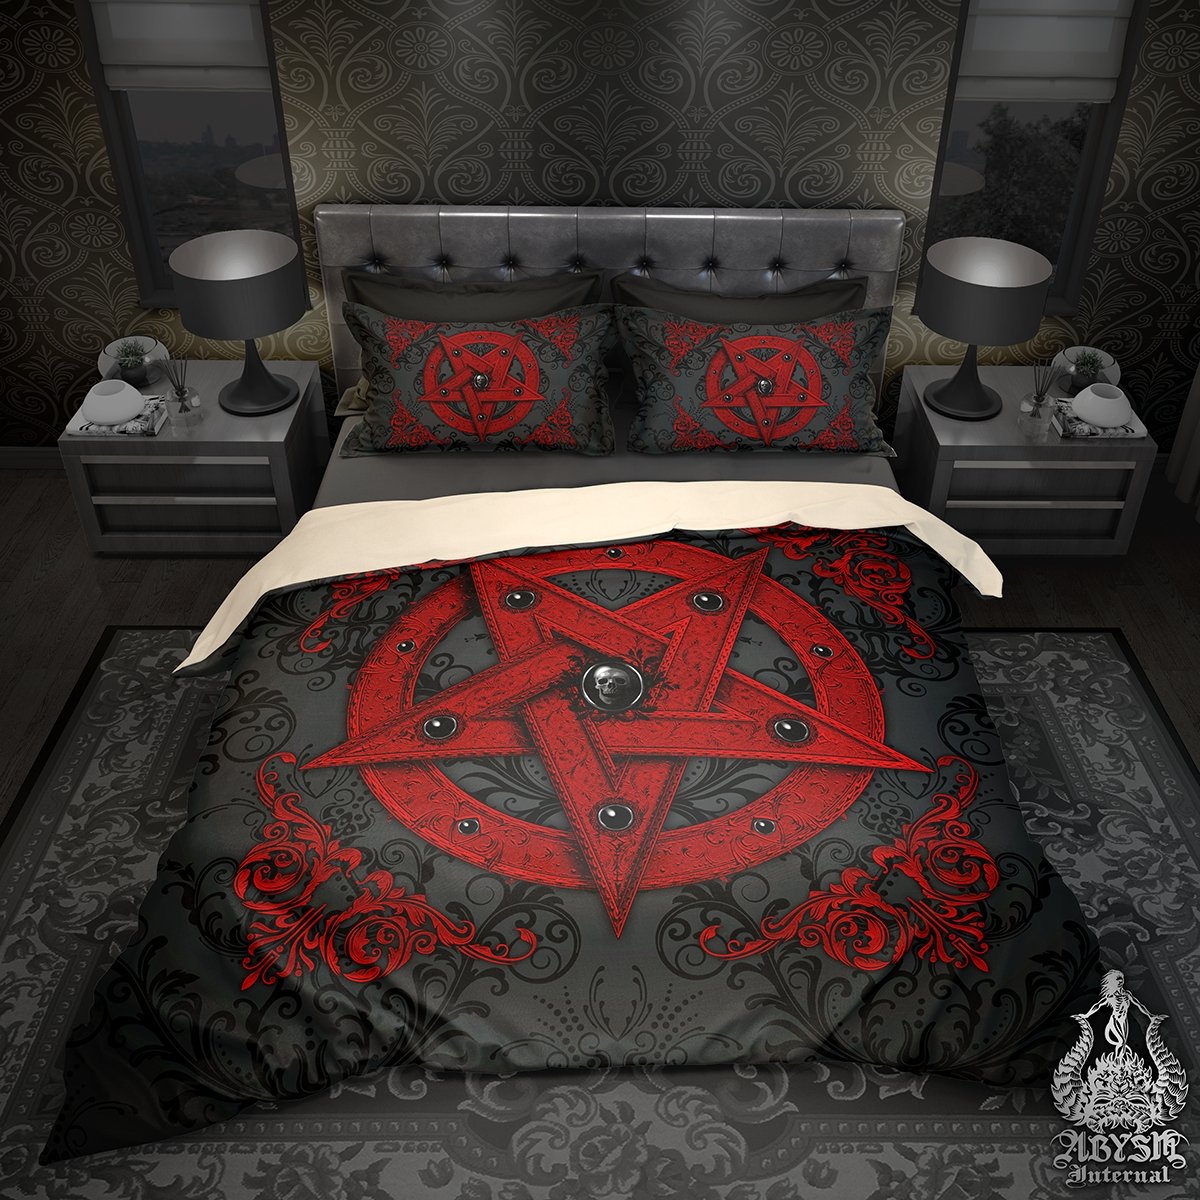 Red Pentagram Bedding Set, Comforter and Duvet, Alternative Bed Cover and Satanic Bedroom Decor, King, Queen and Twin Size - Skull Art - Abysm Internal